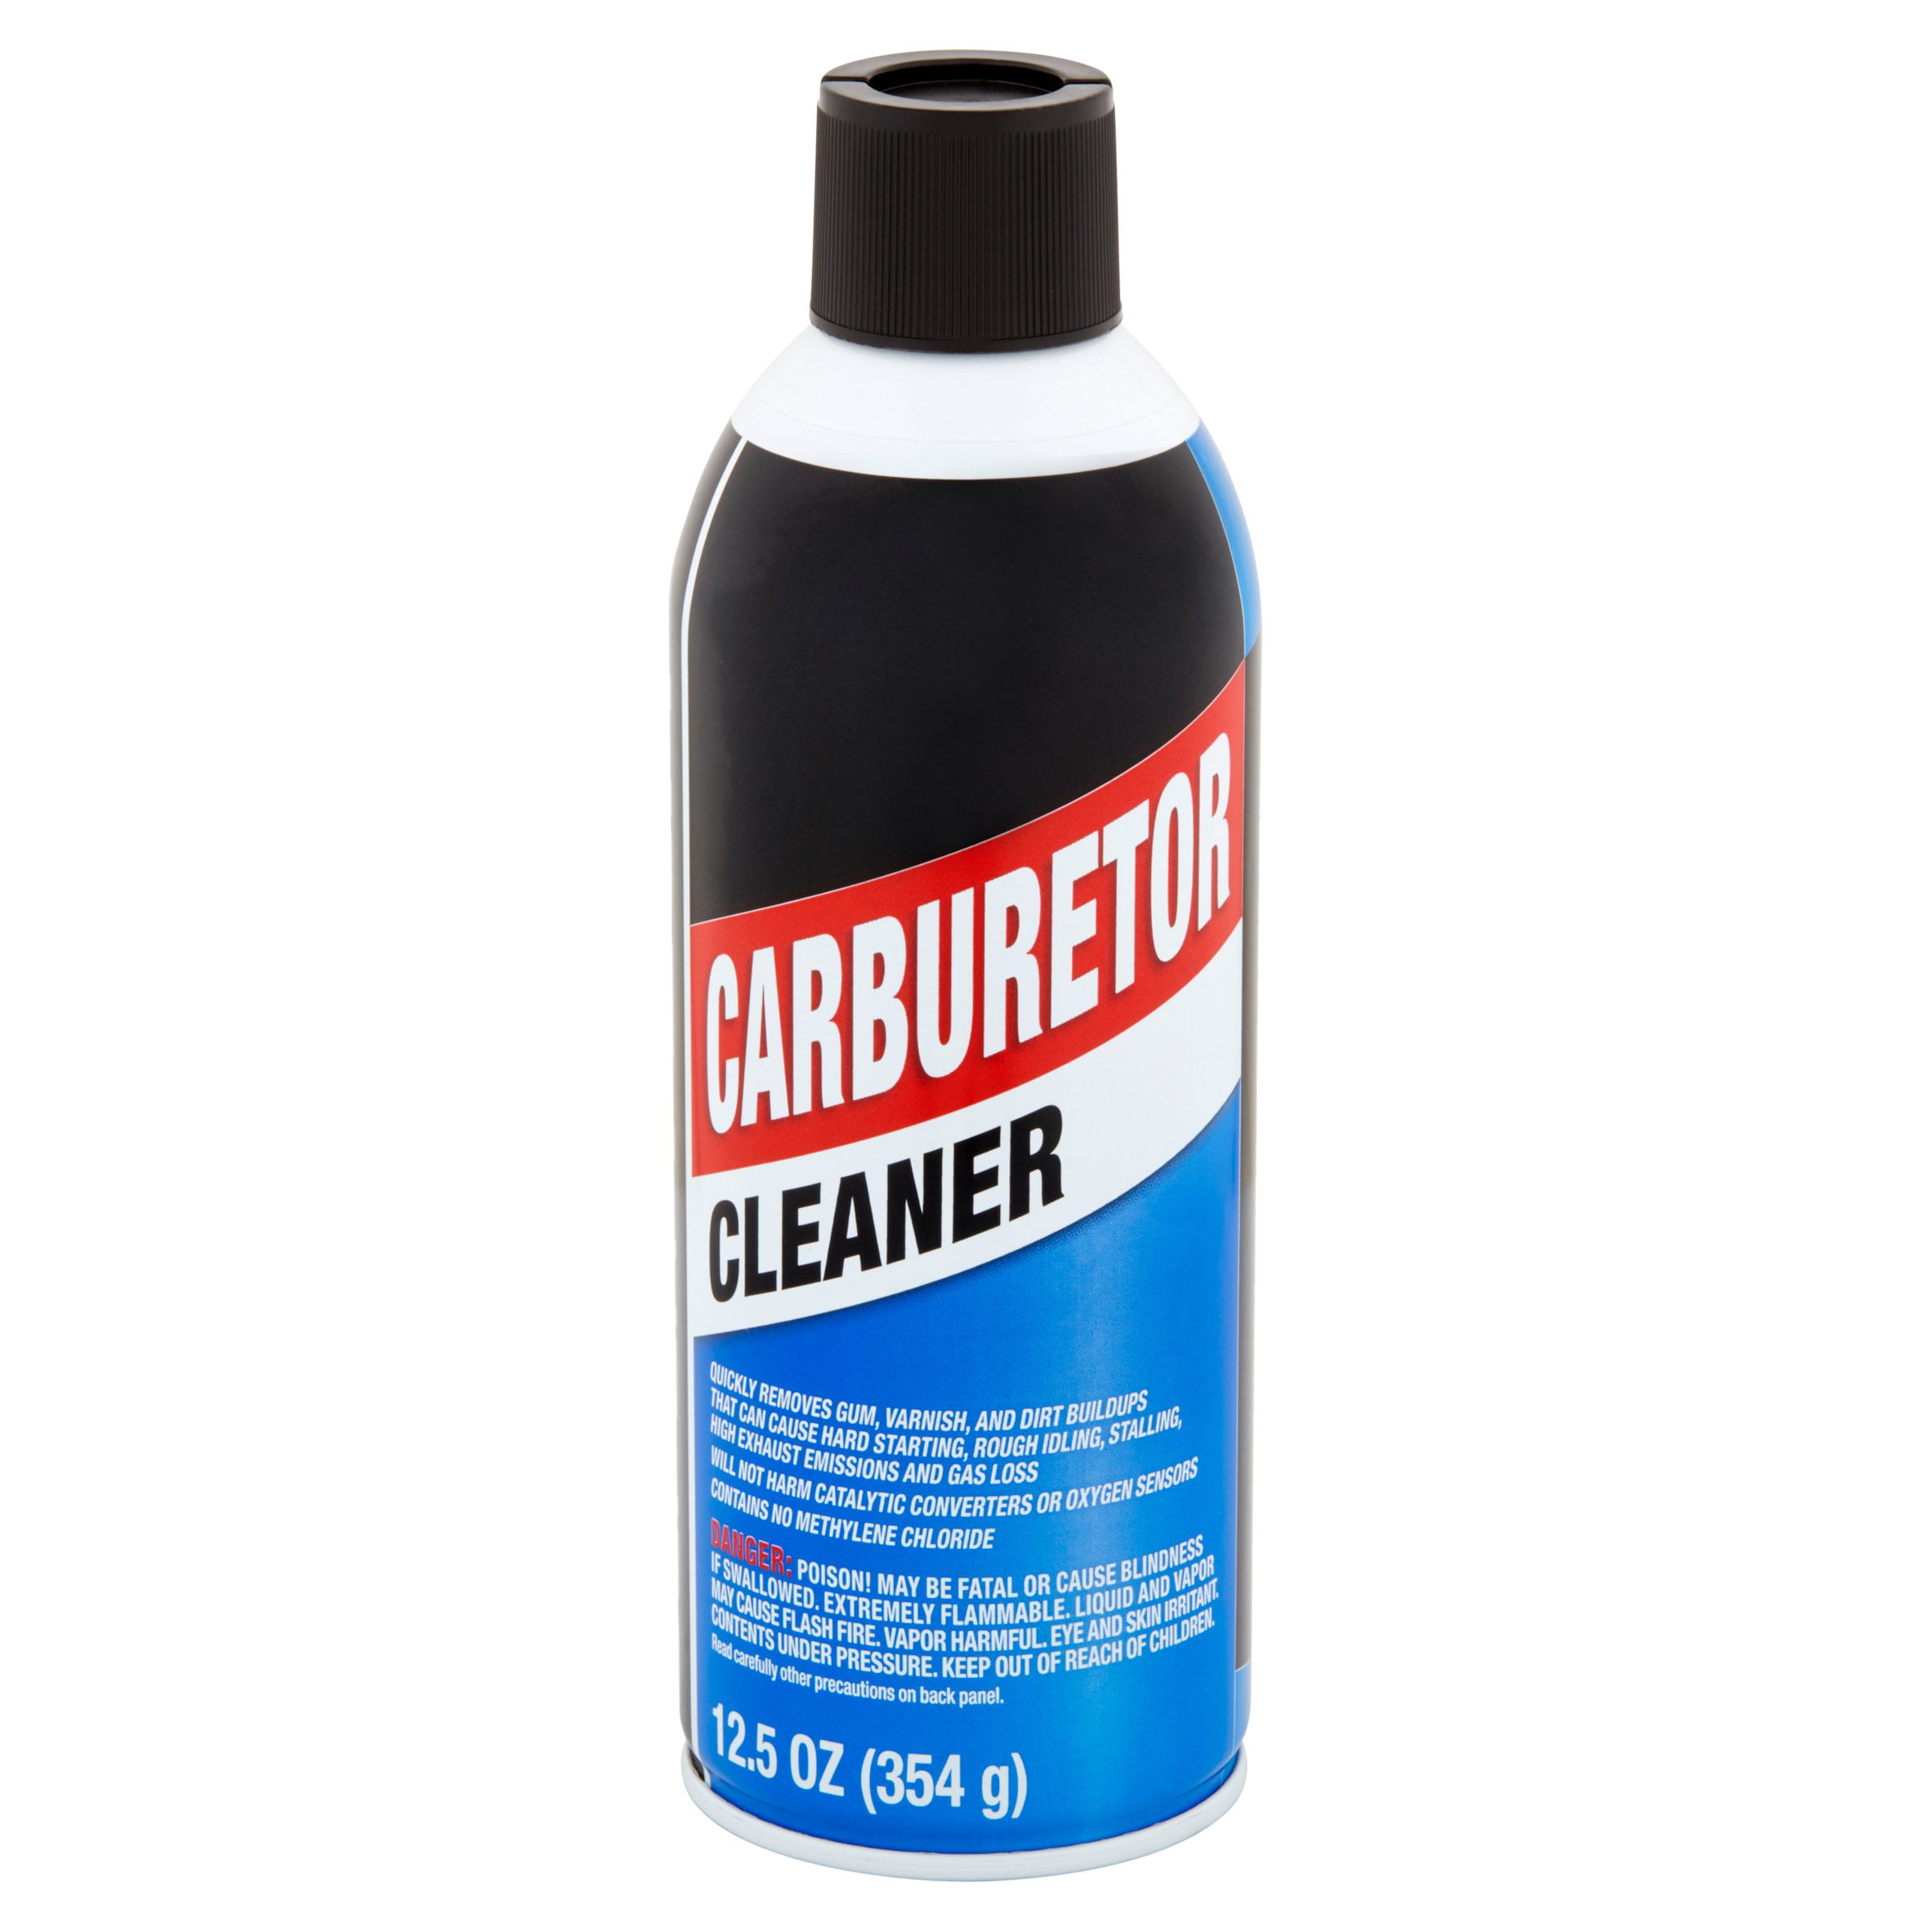 NASA Chemicals - NASA Carburetor Cleaner Spray is a unique blend of  solvents that quickly dissolves gum, varnish, and carbon to restore  carburetor & engine performance. It removes contaminants that affect the